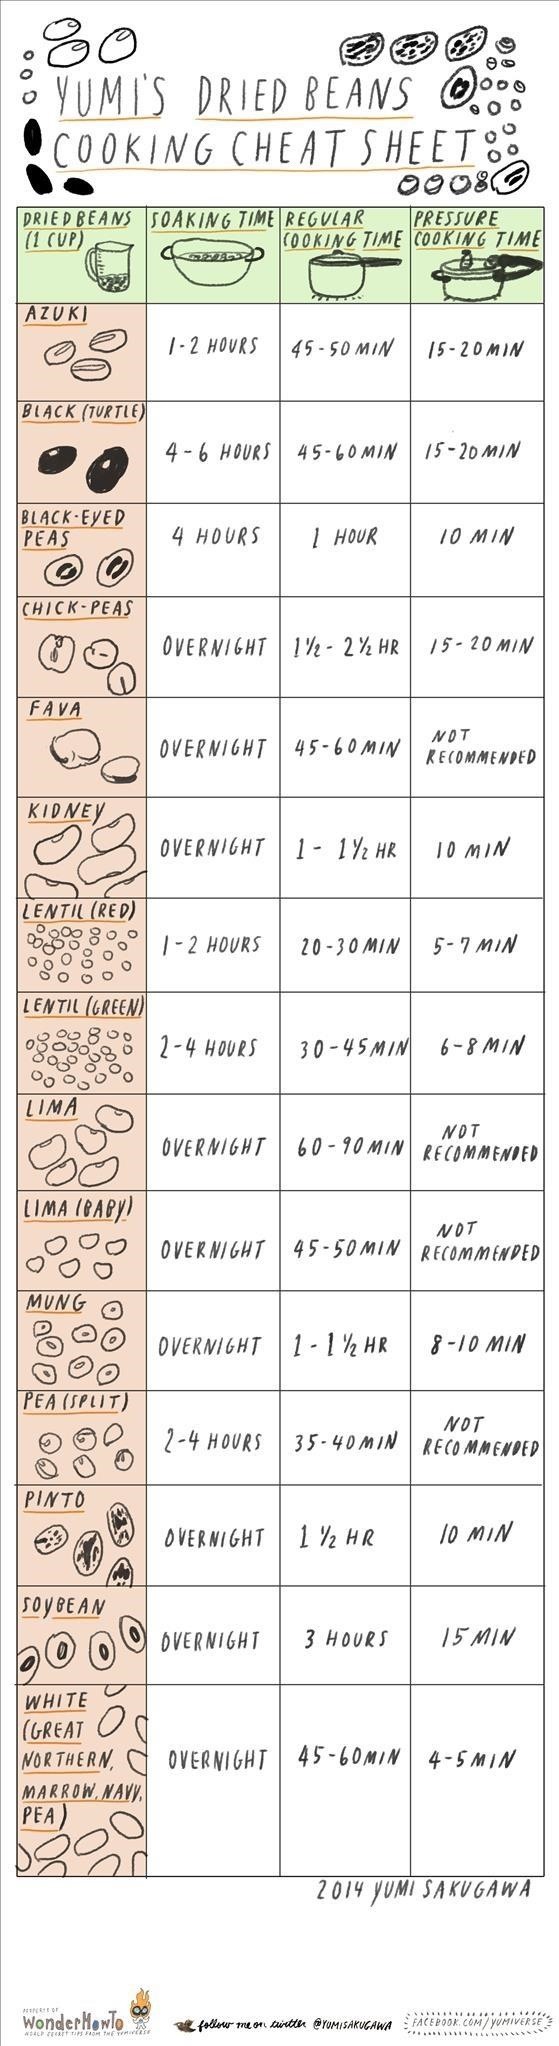 The Dried Beans Cheat Sheet: Soaking & Cooking Times for 15 Different Beans